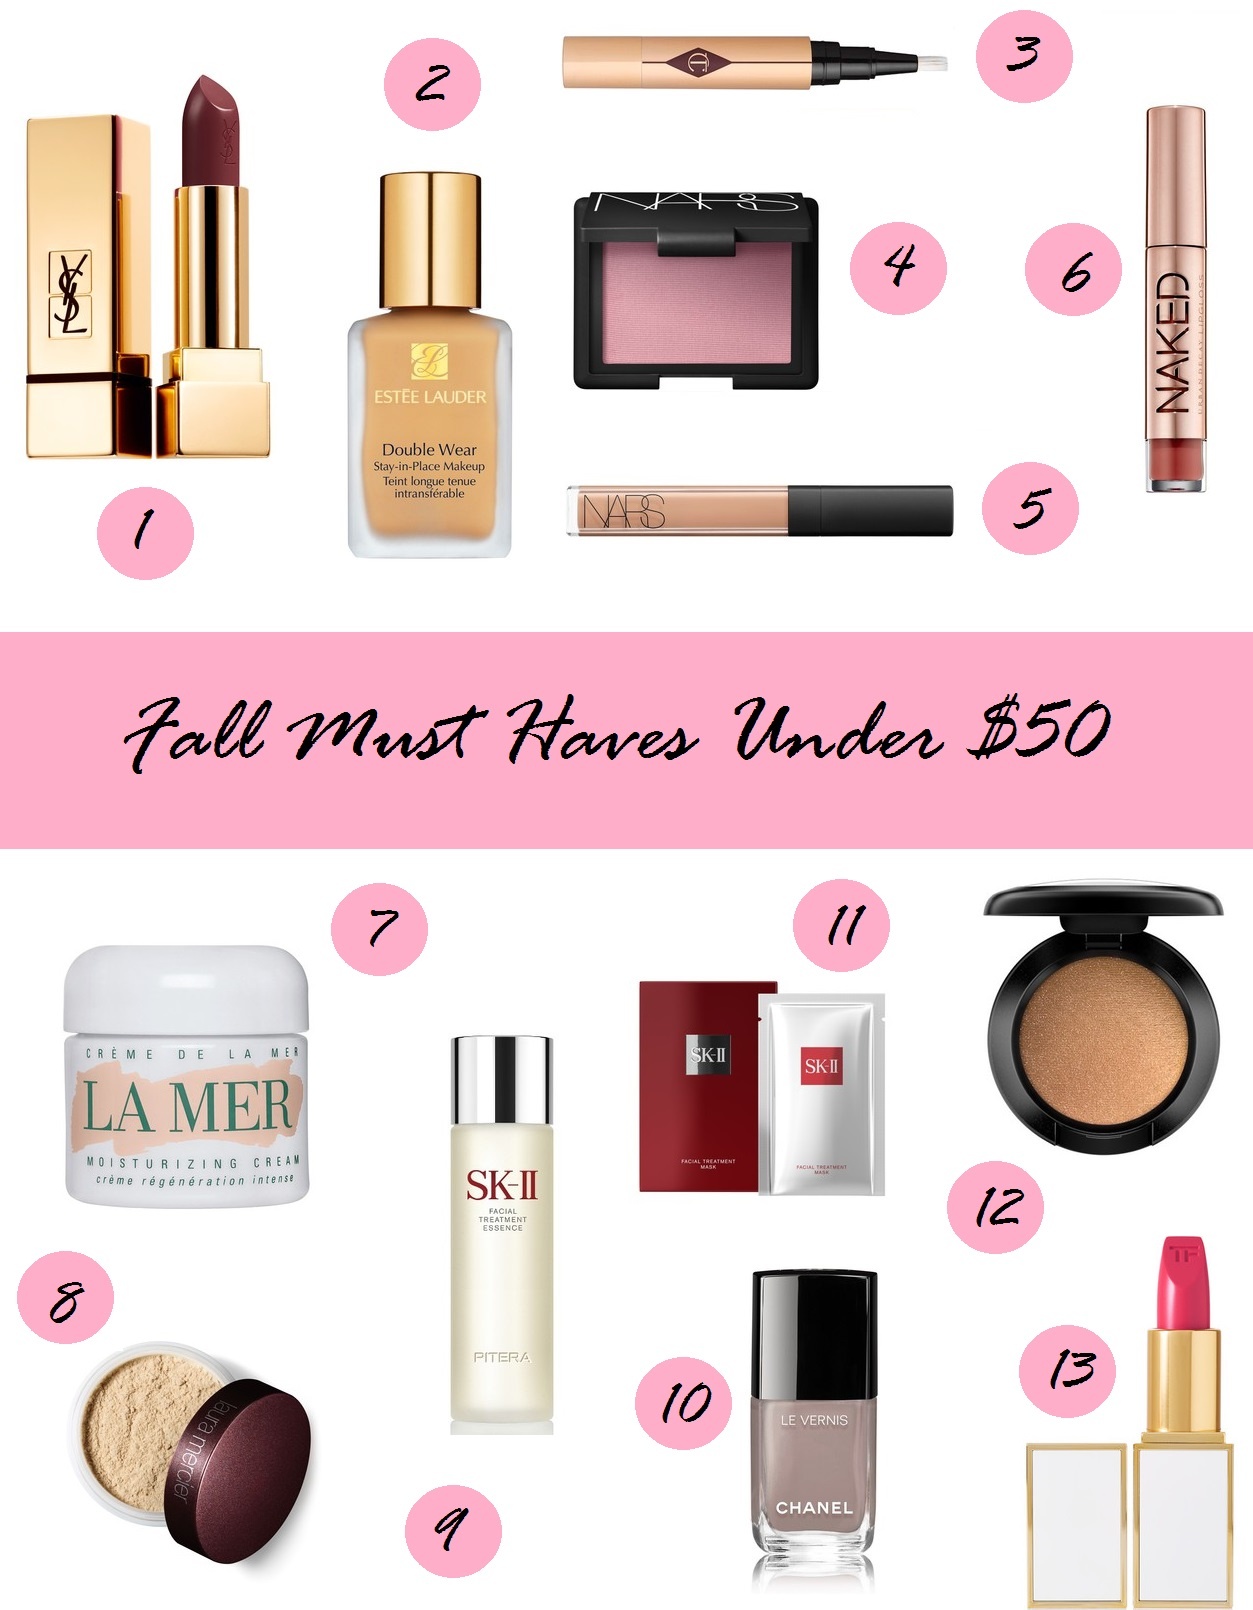 Fall Beauty Must Haves Under $50